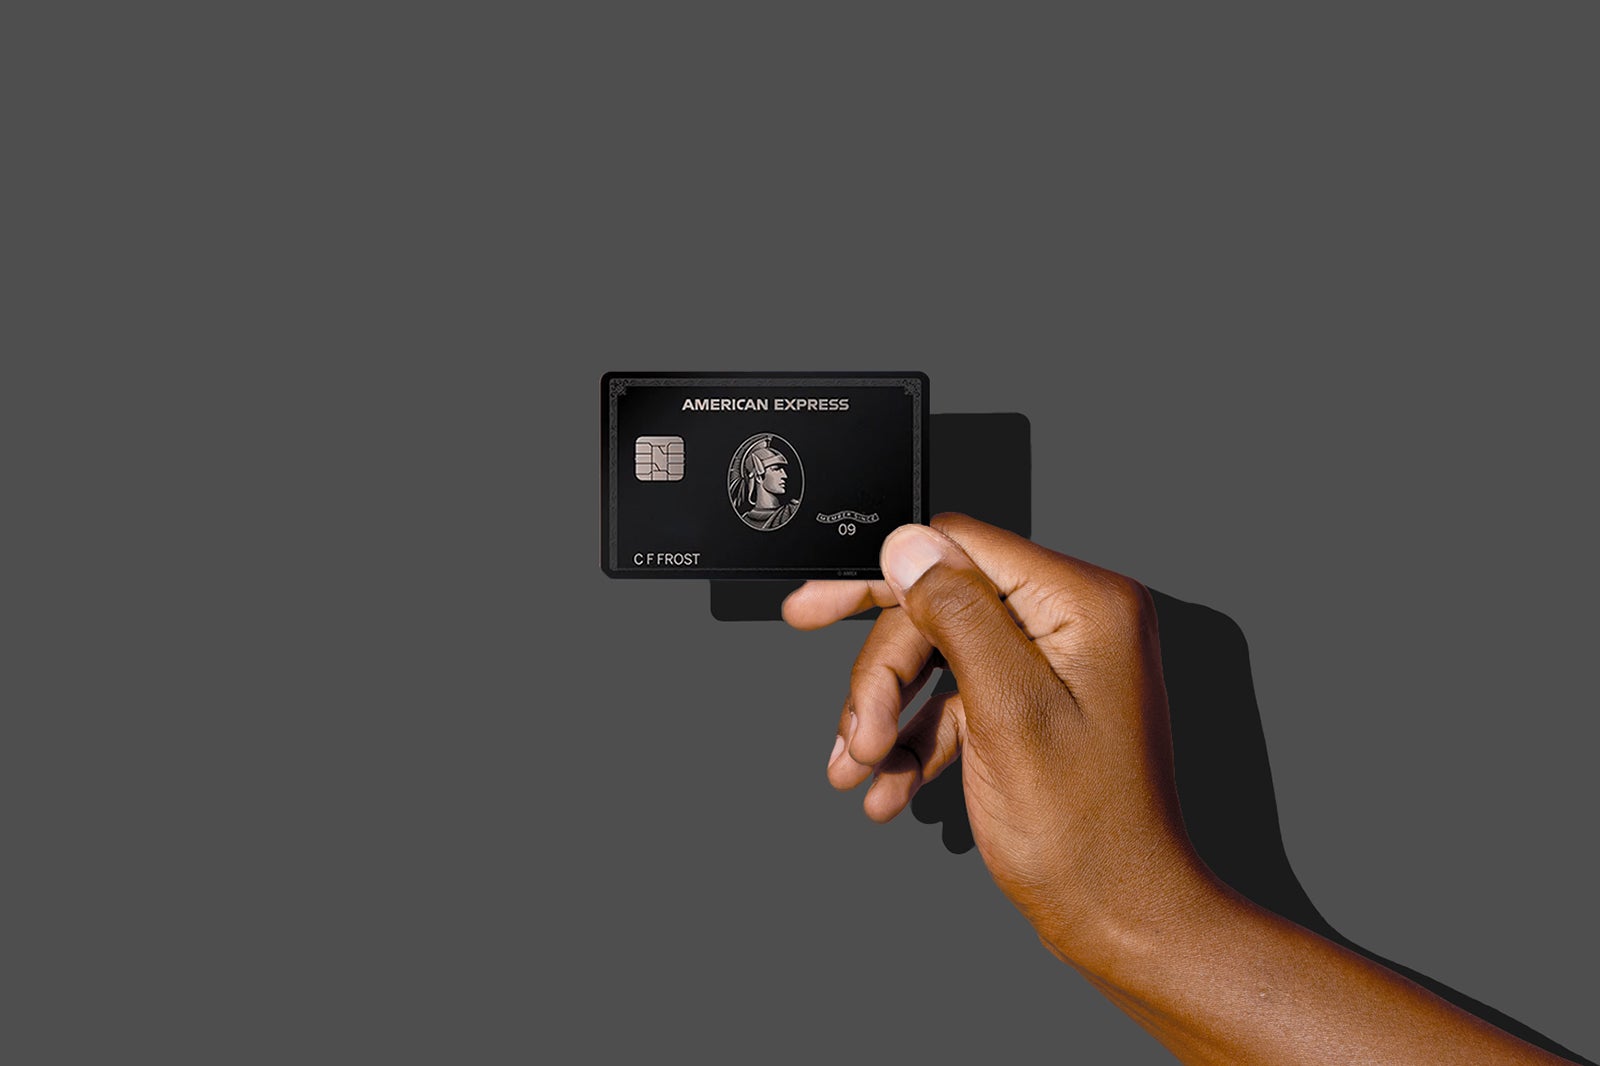 Amex Centurion (black) card benefits — and how to get them without the card  - The Points Guy